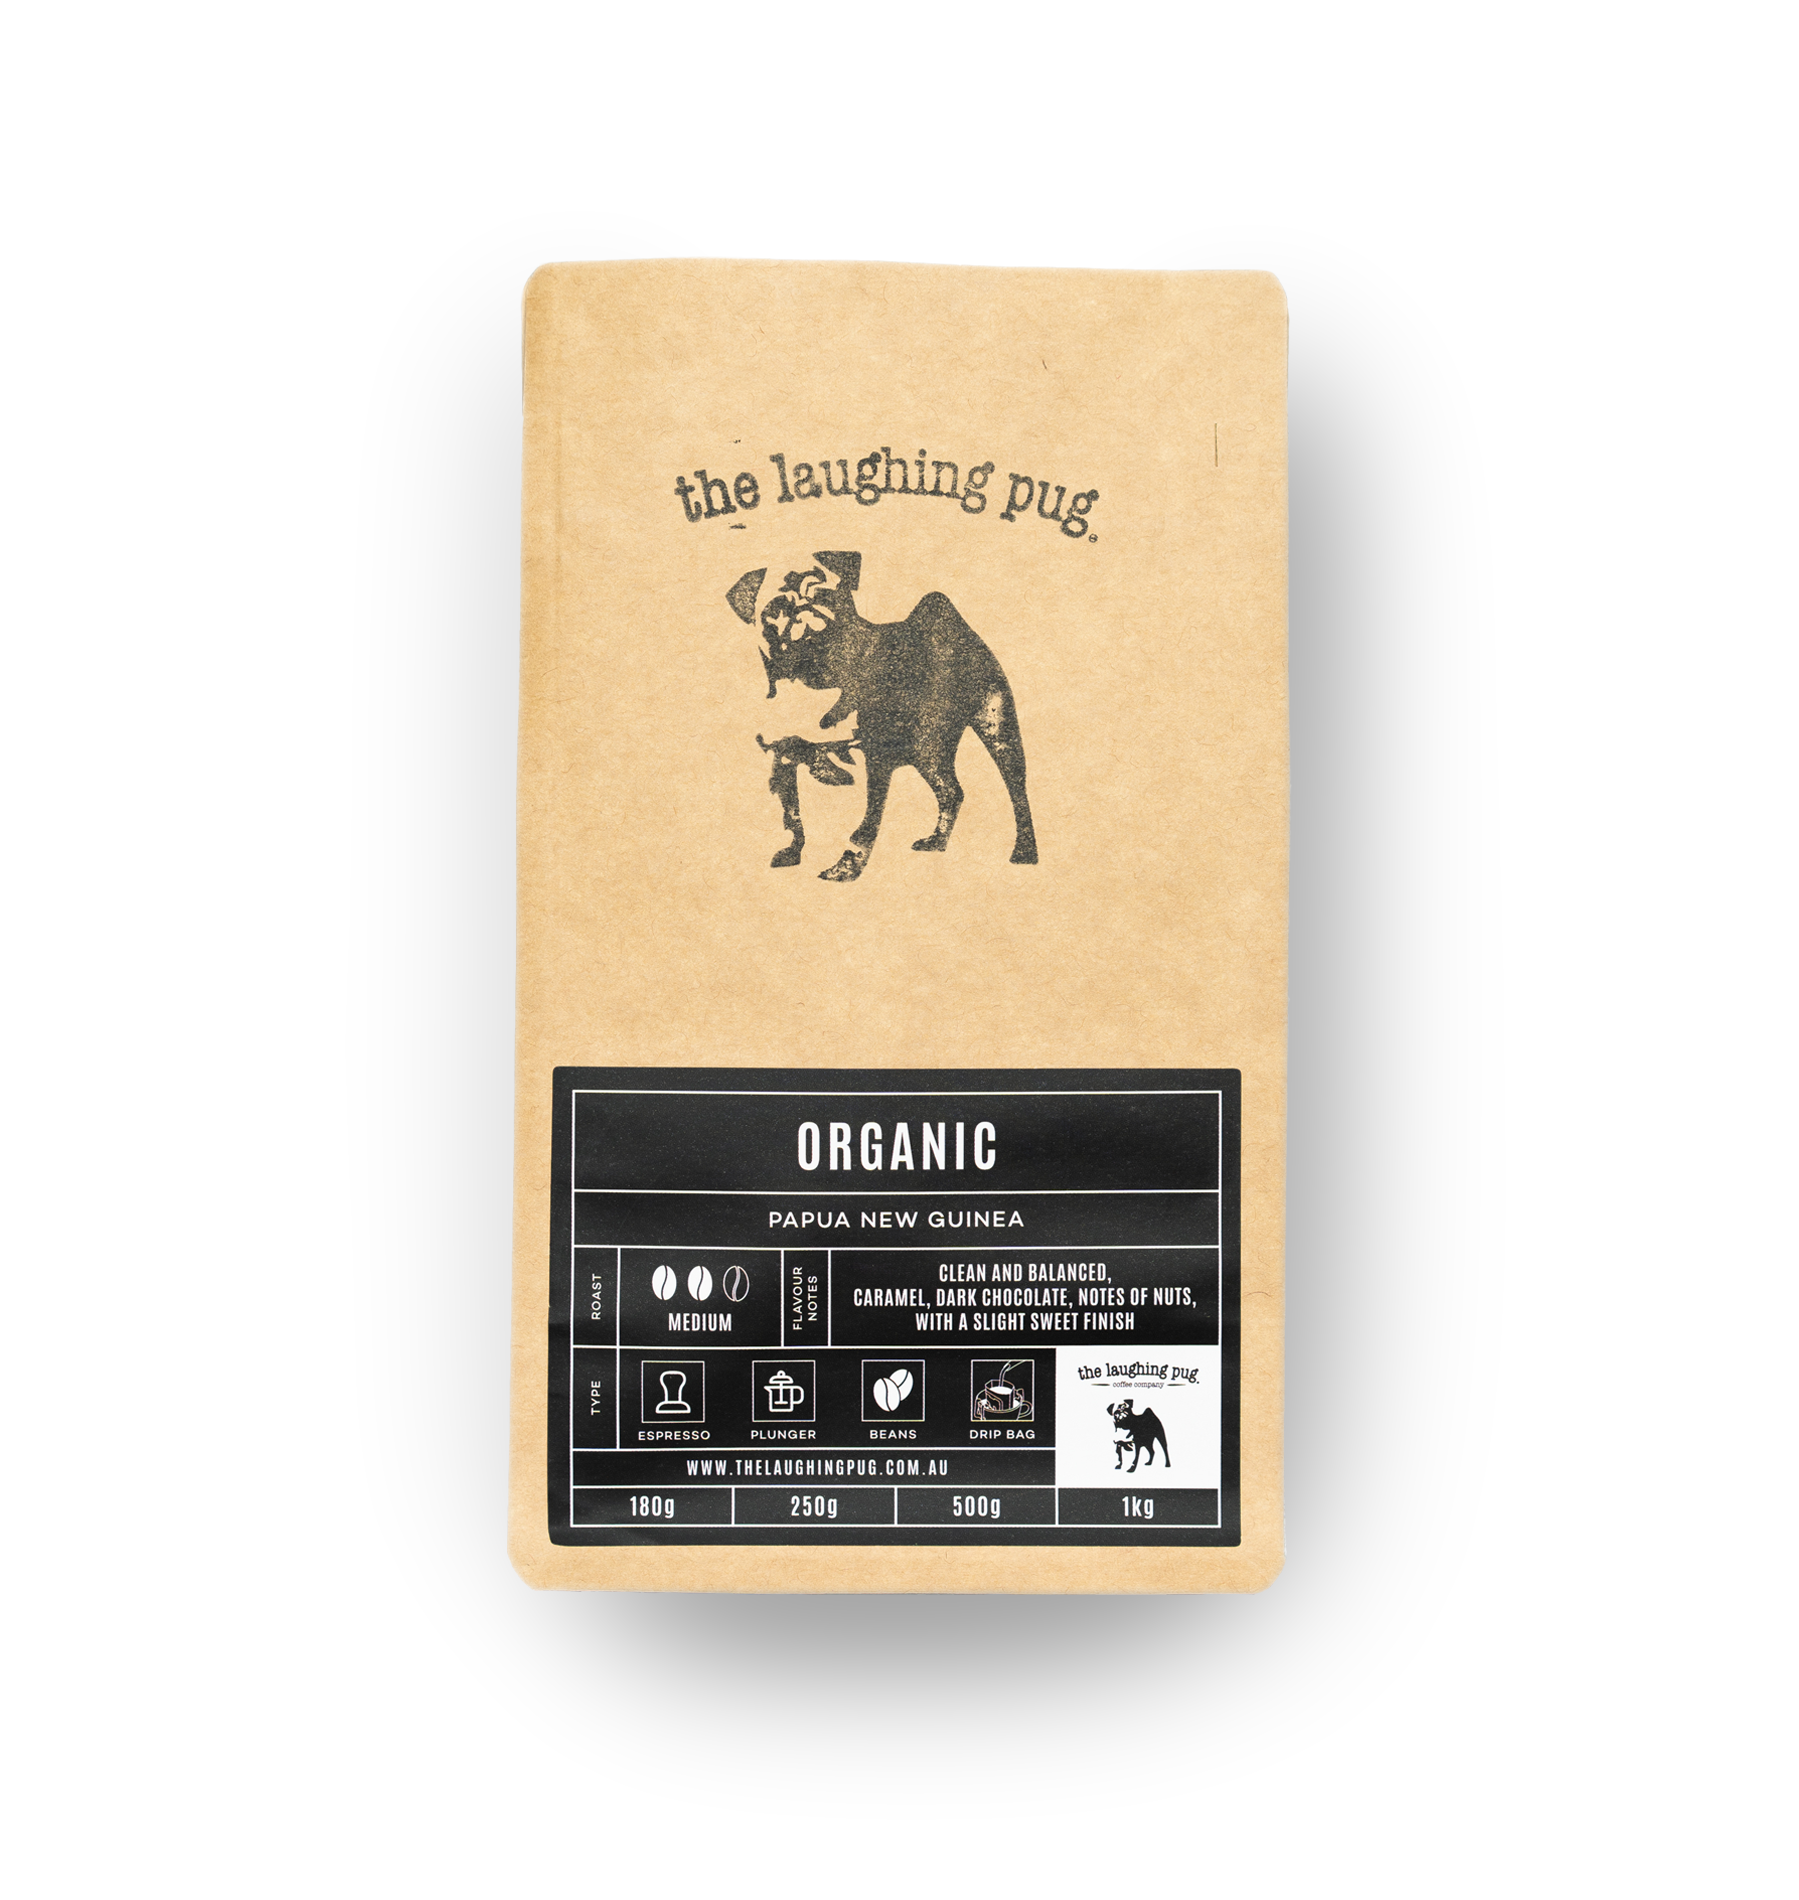 The Laughing Pug's Premium Whole Coffee Beans